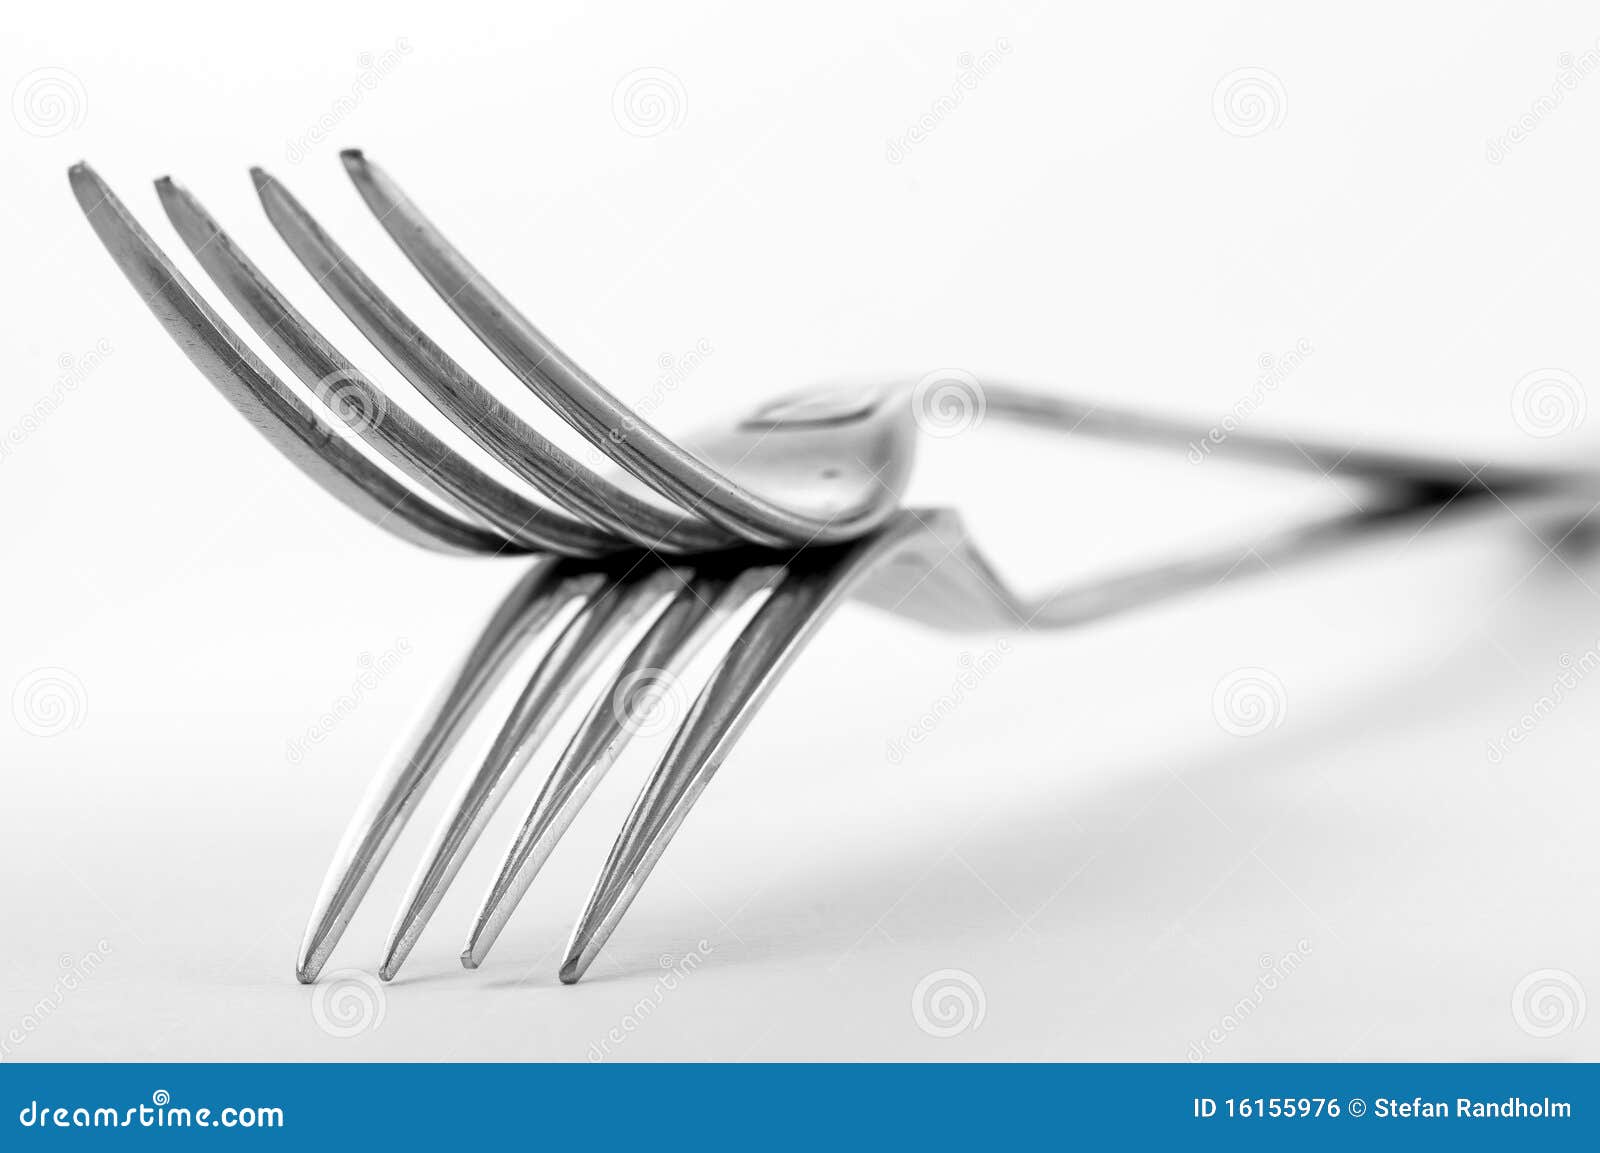 double fork